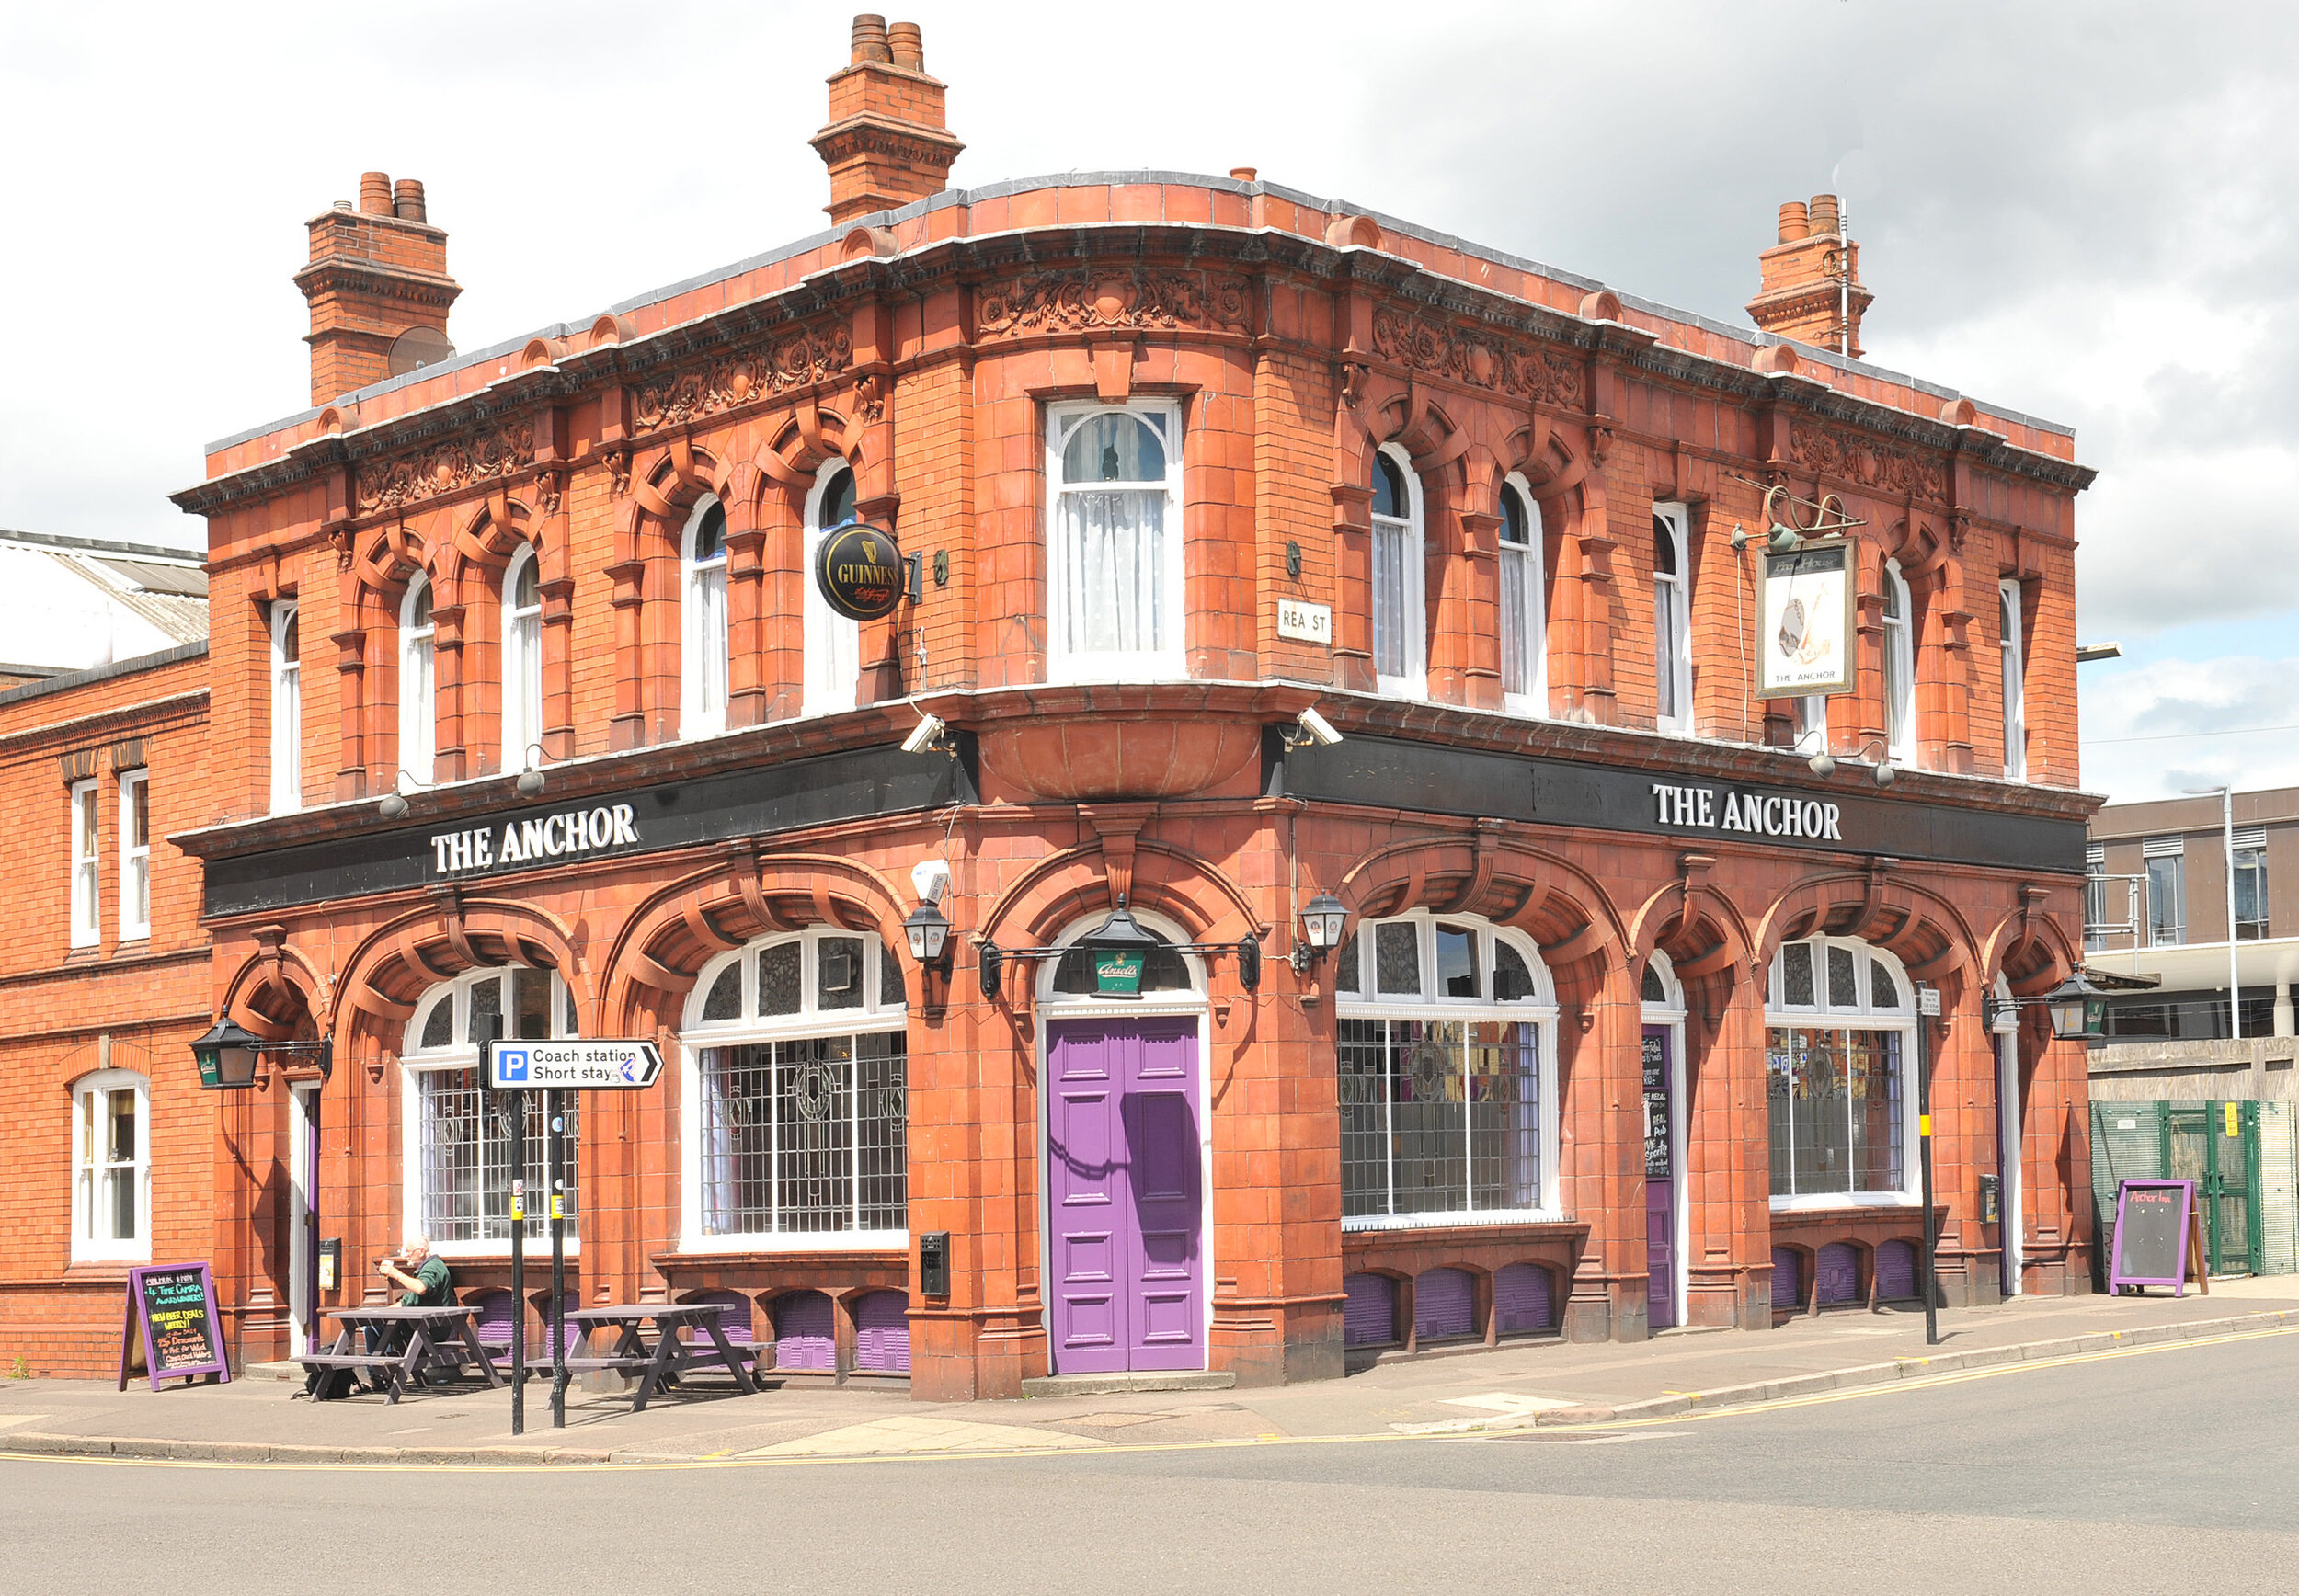   The Anchor (1902), adjacent to Digbeth Bus Station in Birmingham, is representative of many similar pubs in the city and adjacent area. Photo: Geoff Brandwood.  